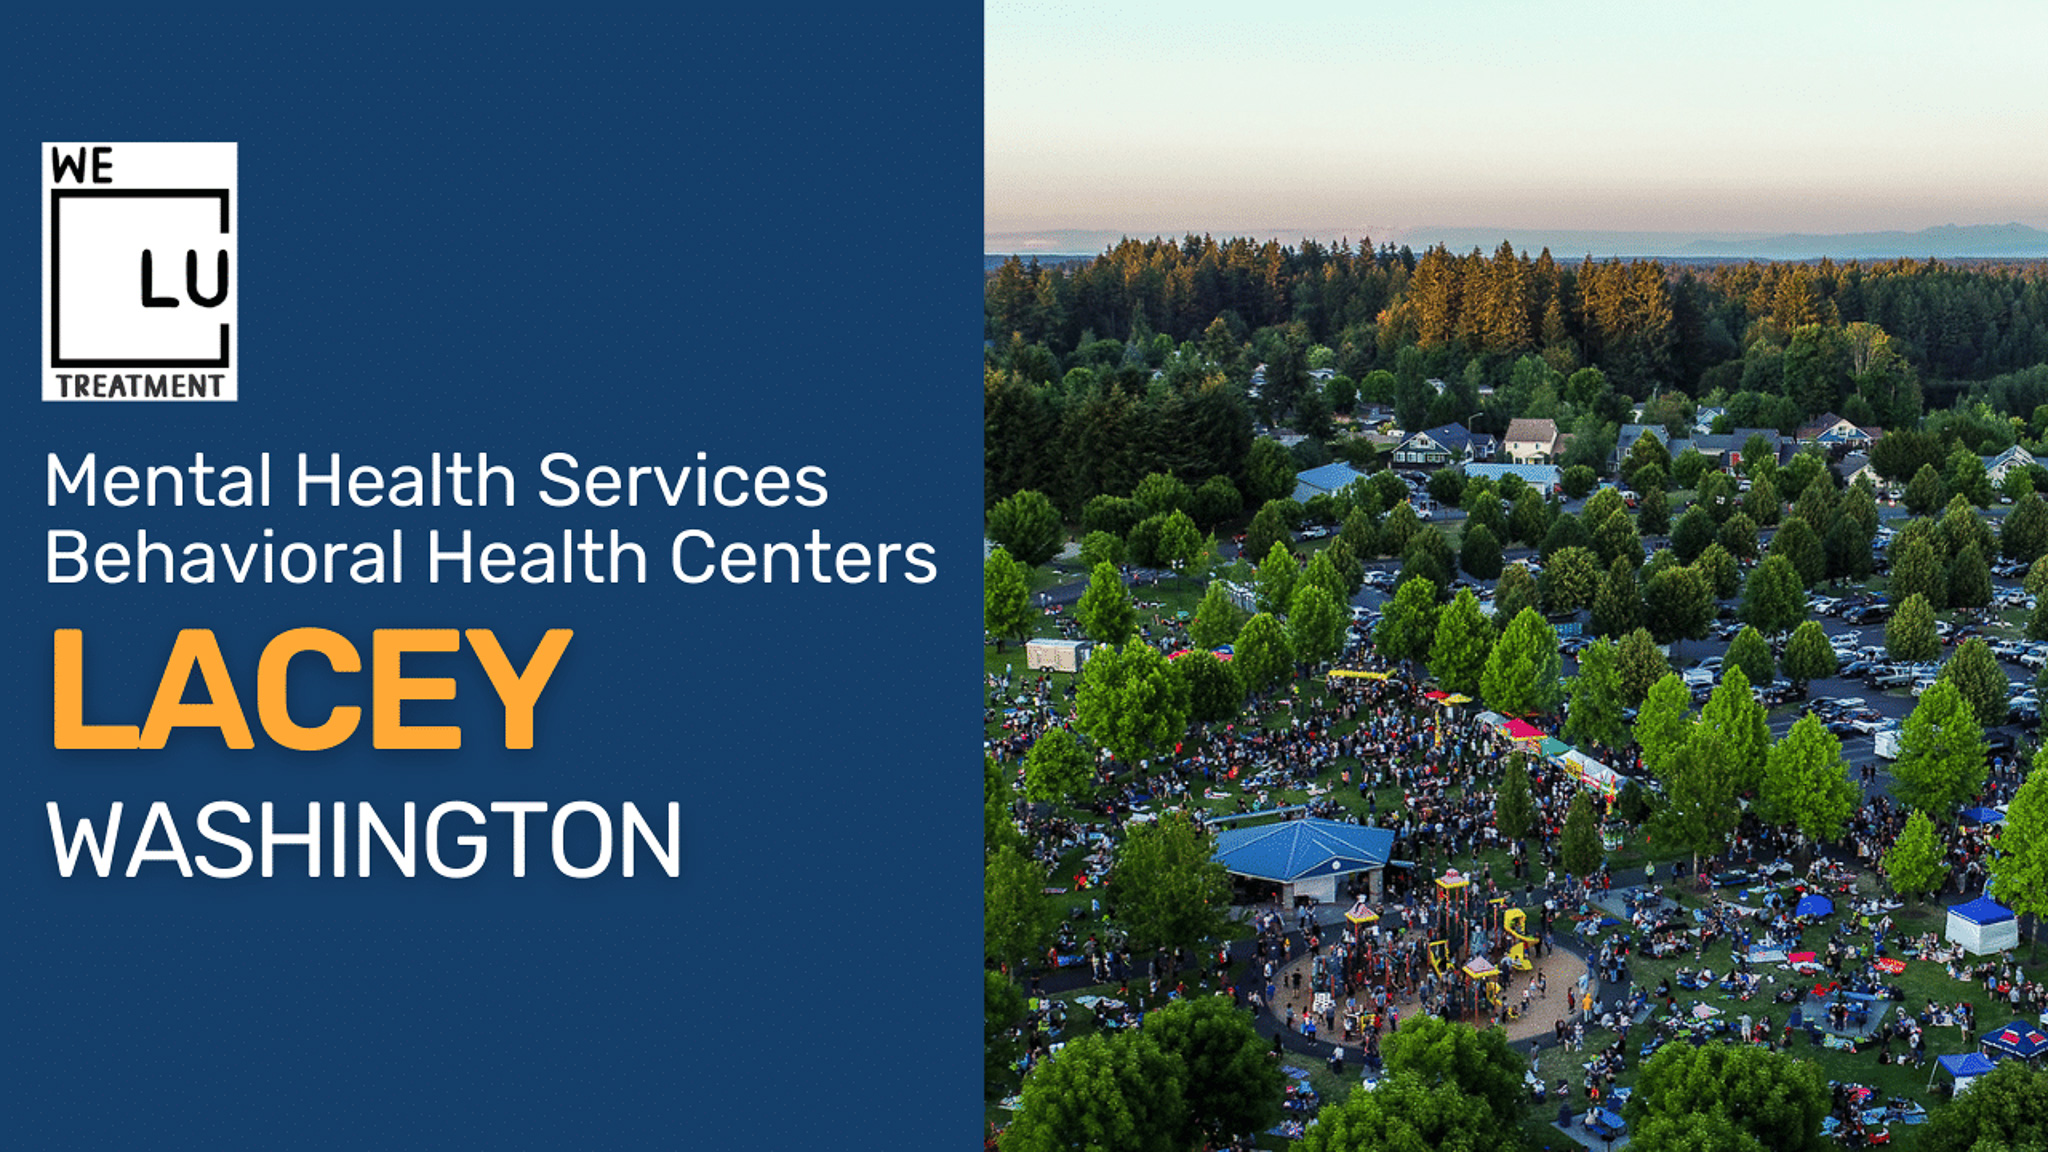 Lacey WA We Level Up treatment center for drug and alcohol rehab detox and mental health services - Image 1